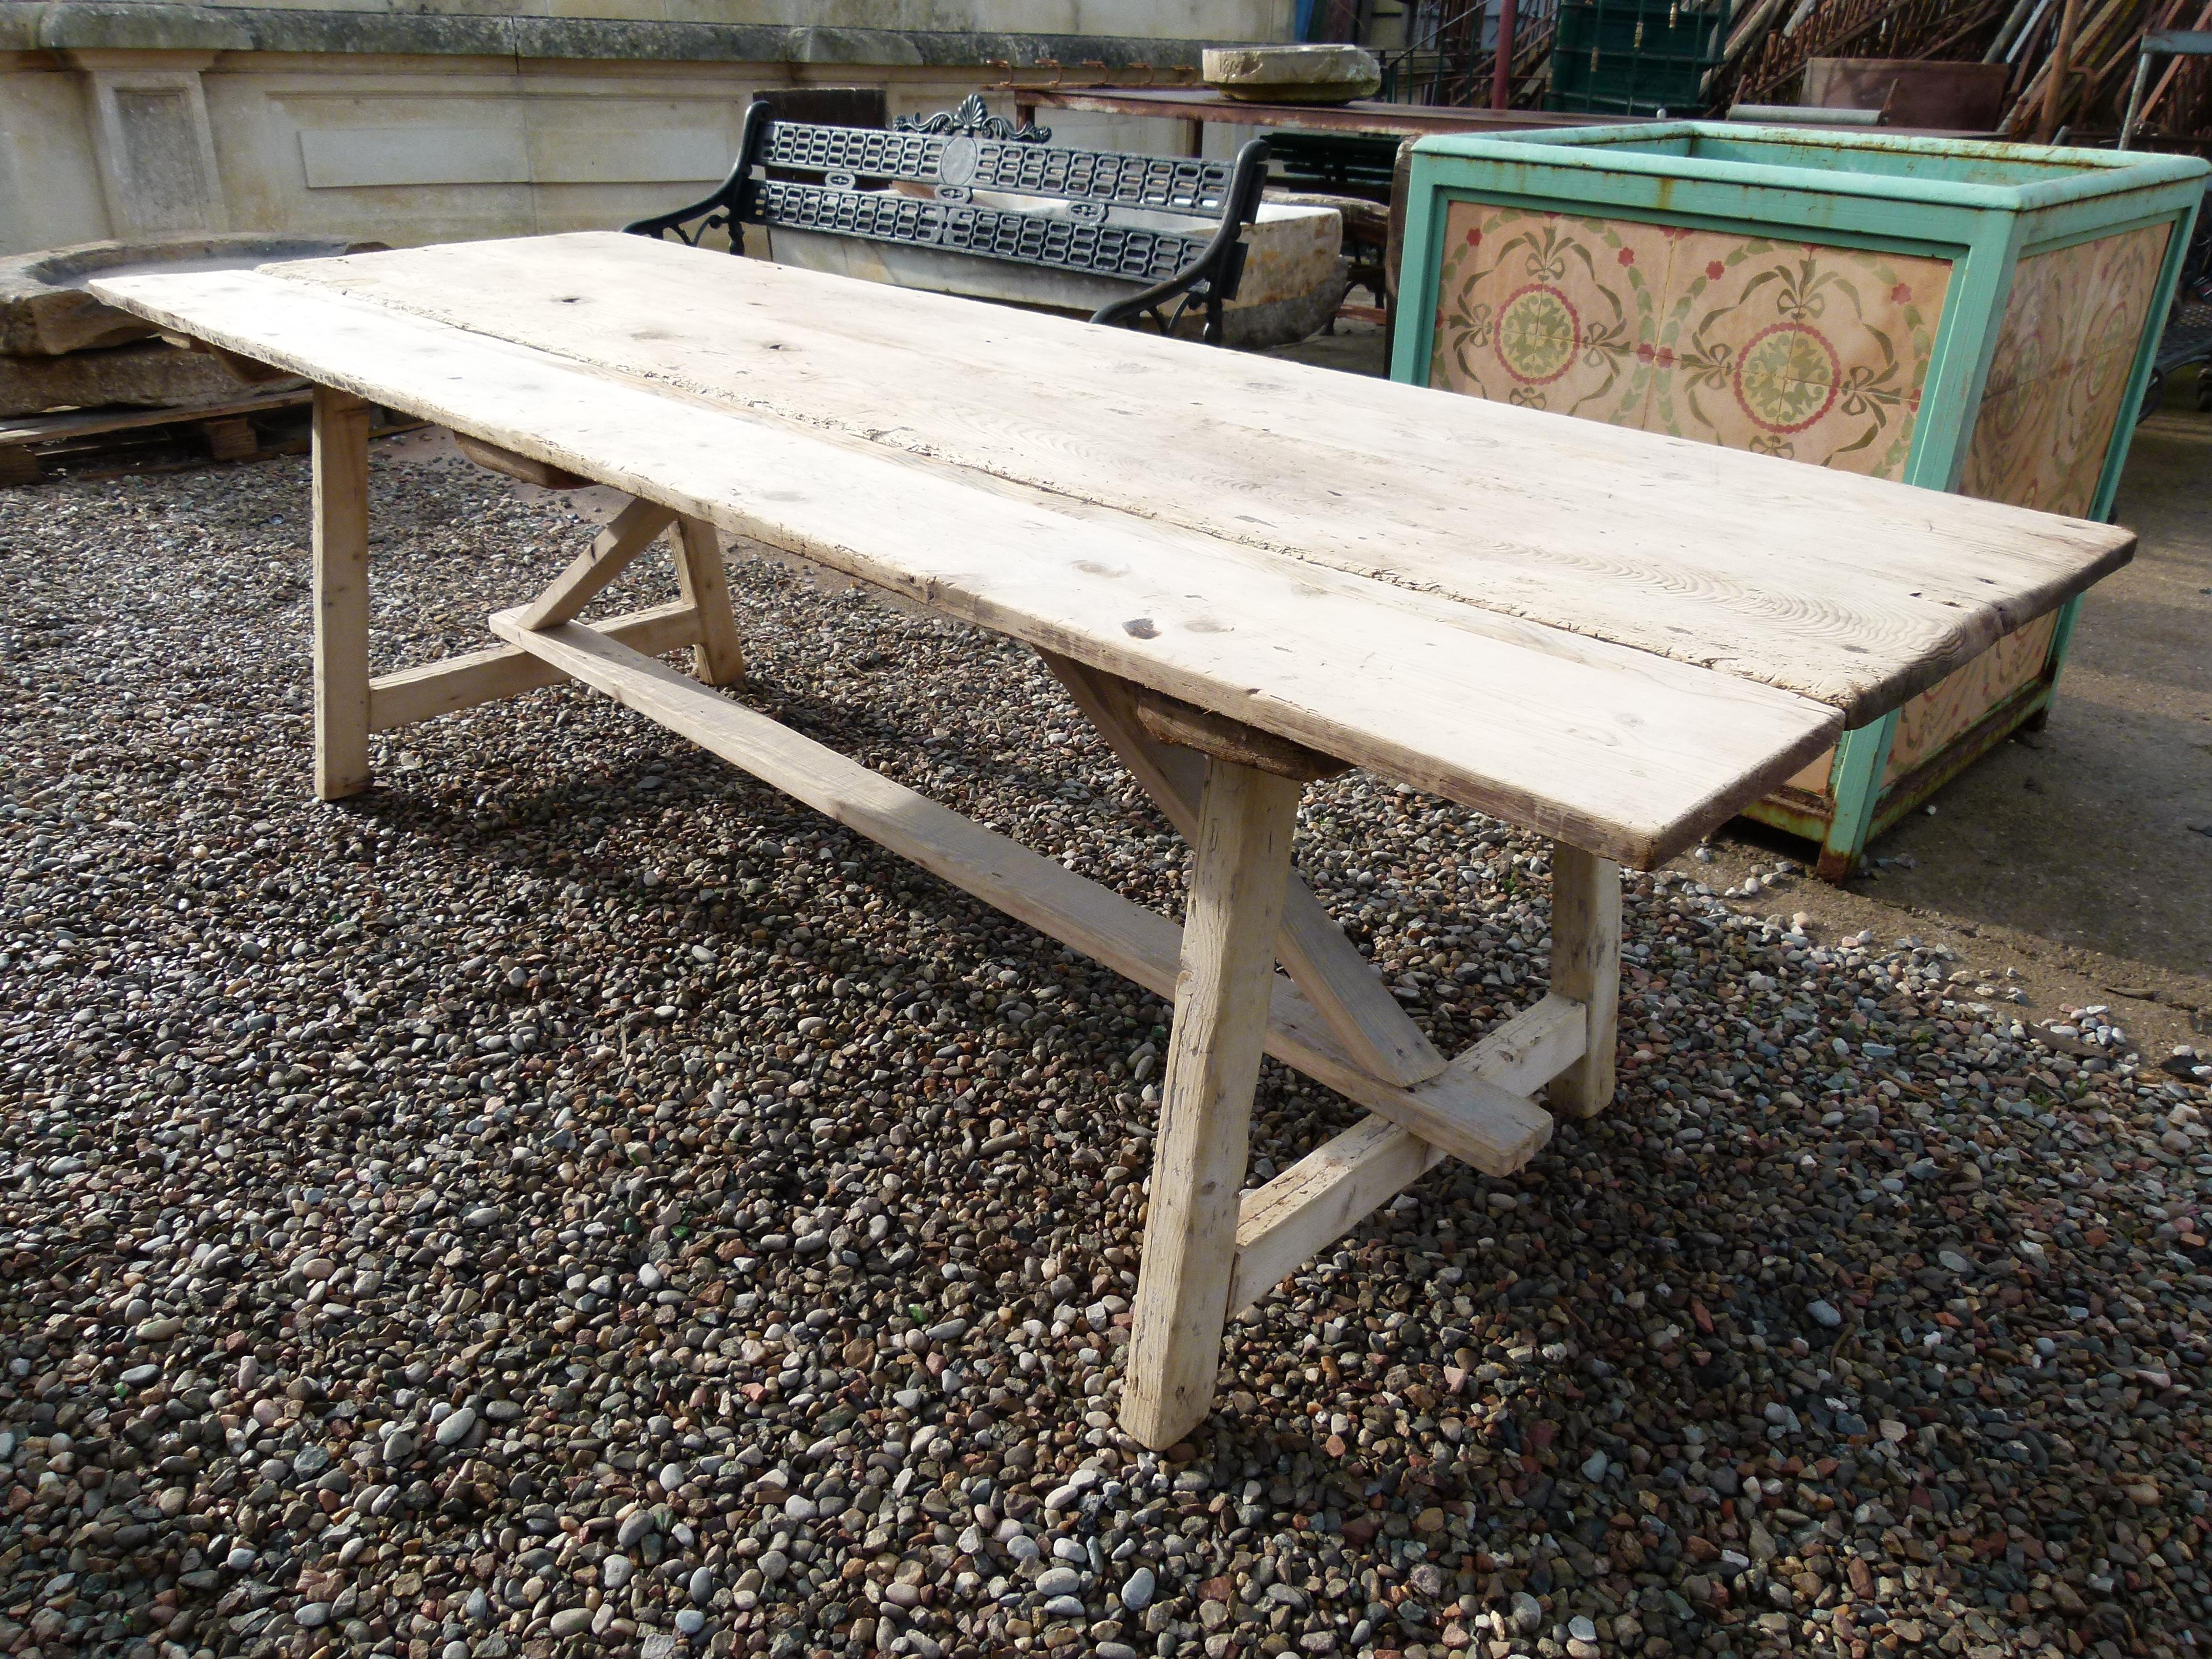 19th Century rustic table from north East Spain ( Catalonian). Made completely from pine wood. Ideal for country style house. It is quite large and can take up to 8-10 diners.

